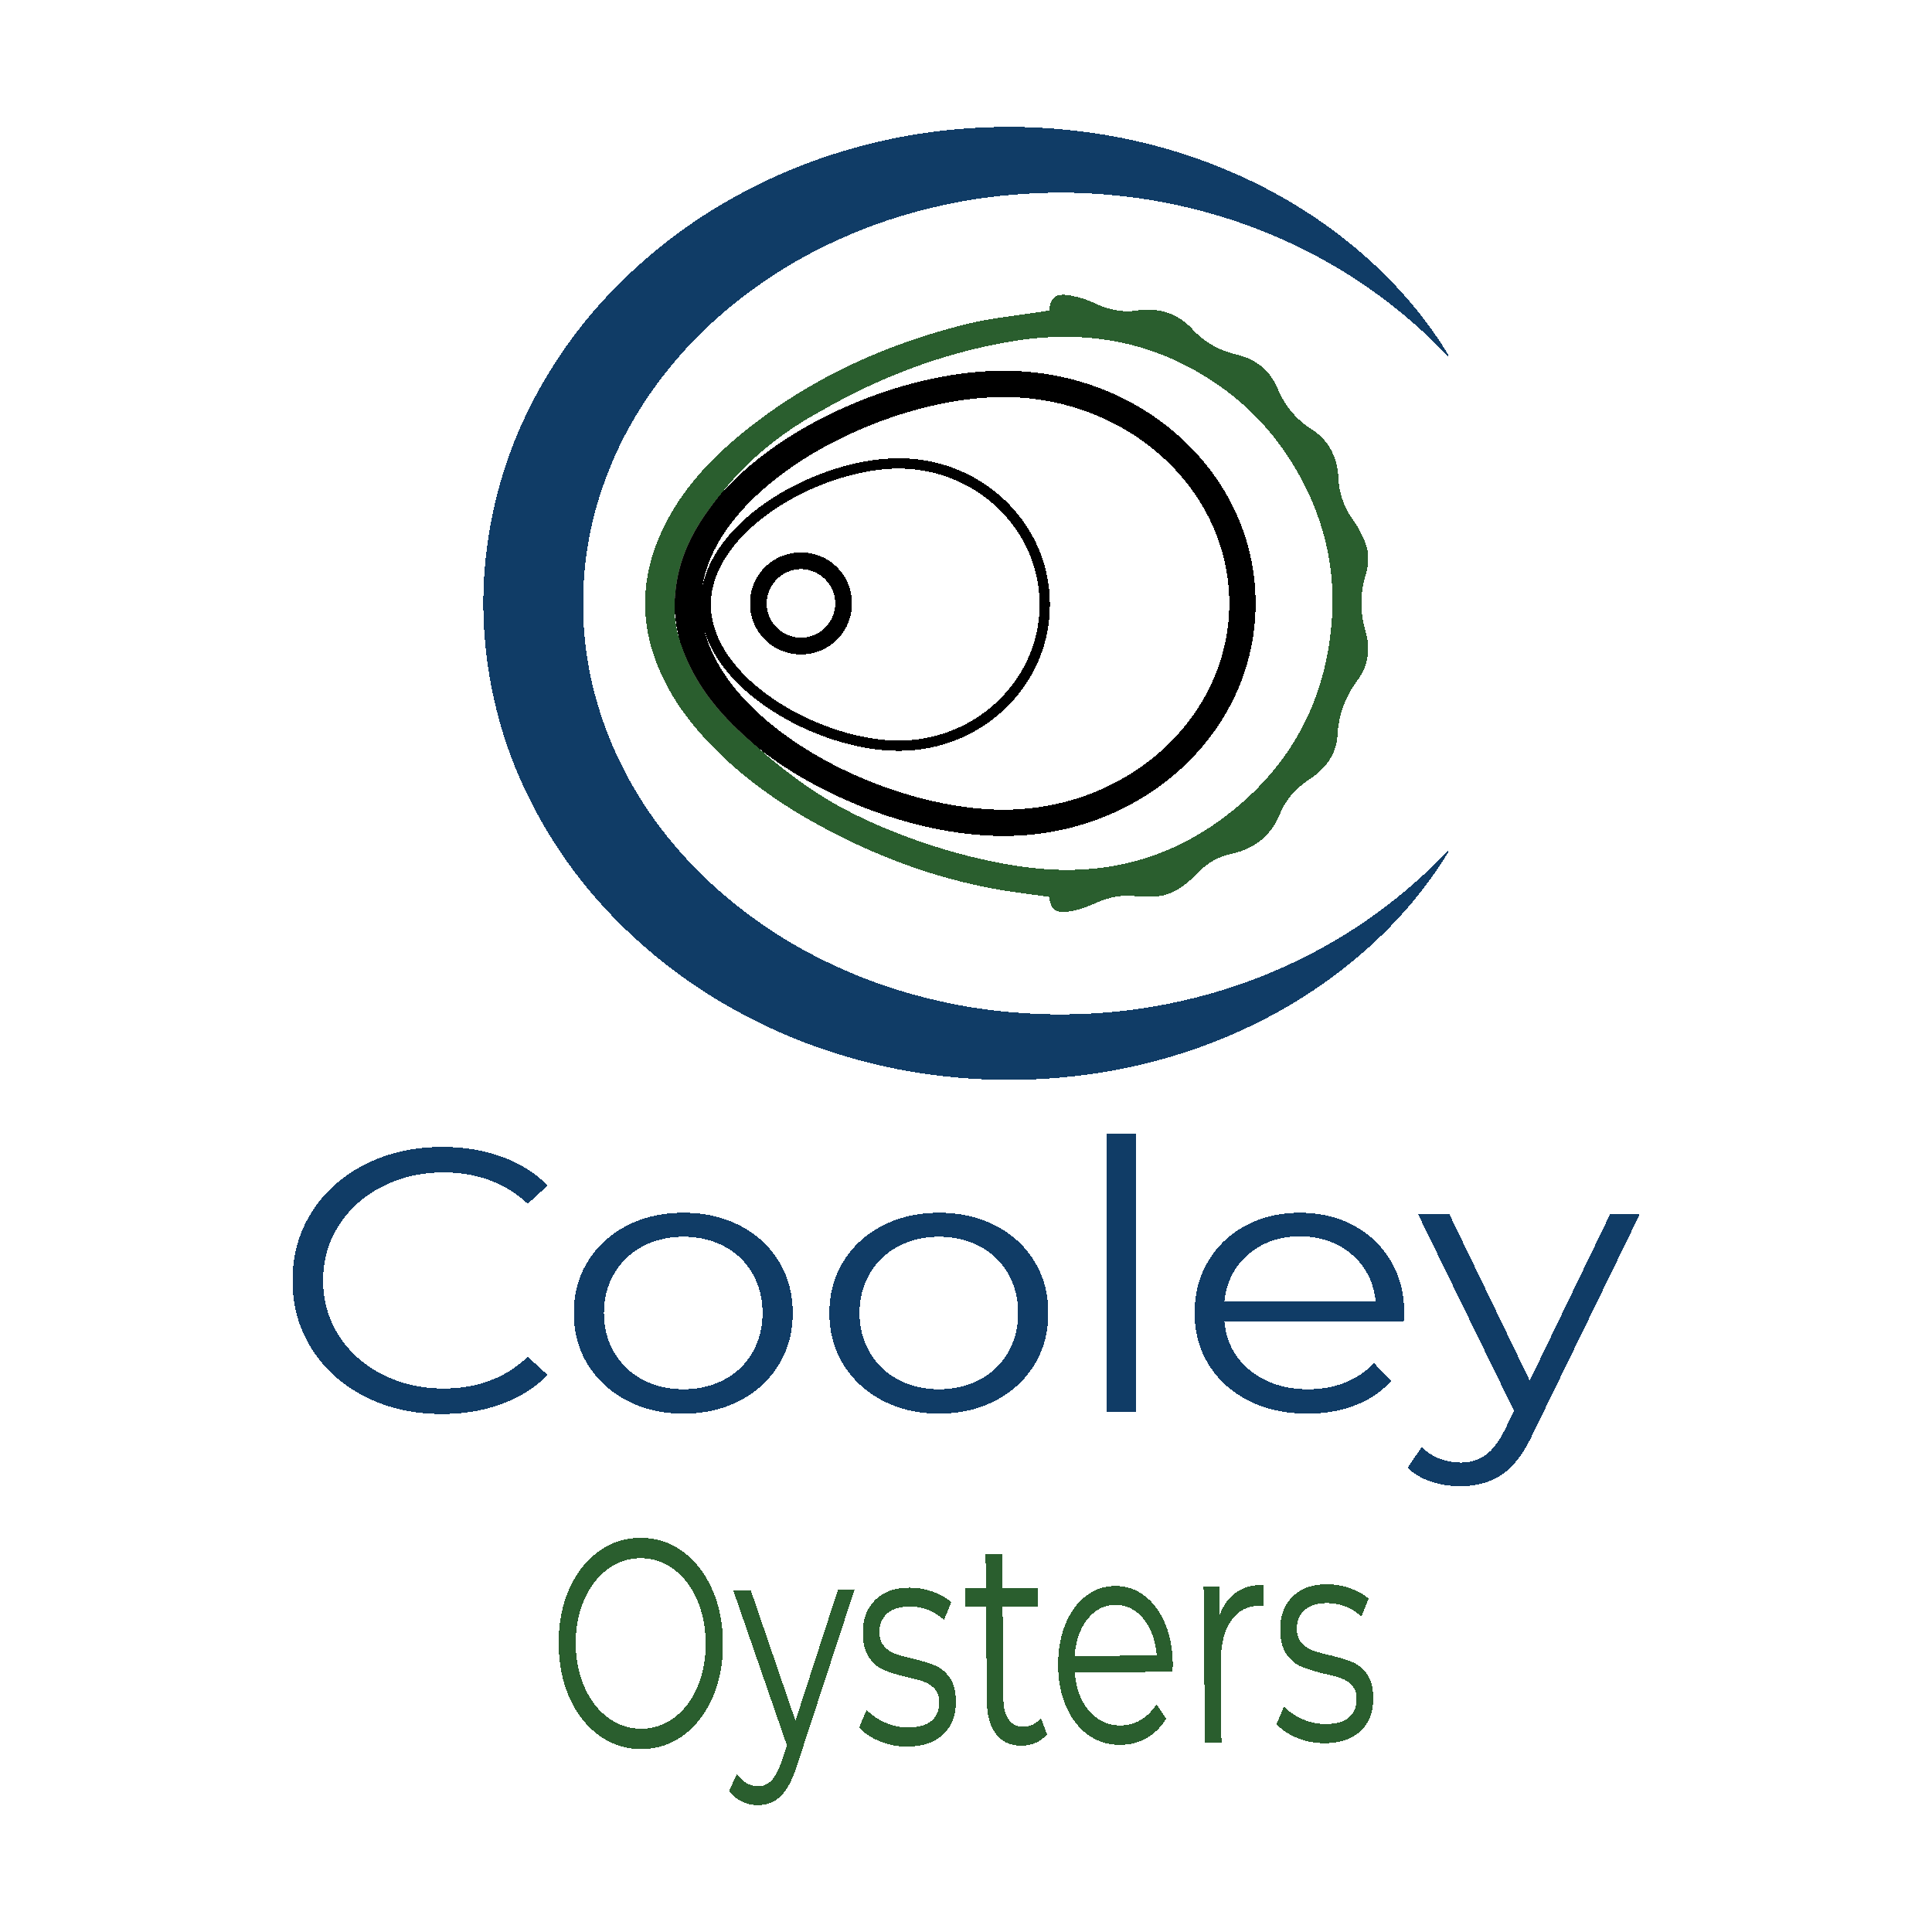 Cooley Oysters Ltd logotype